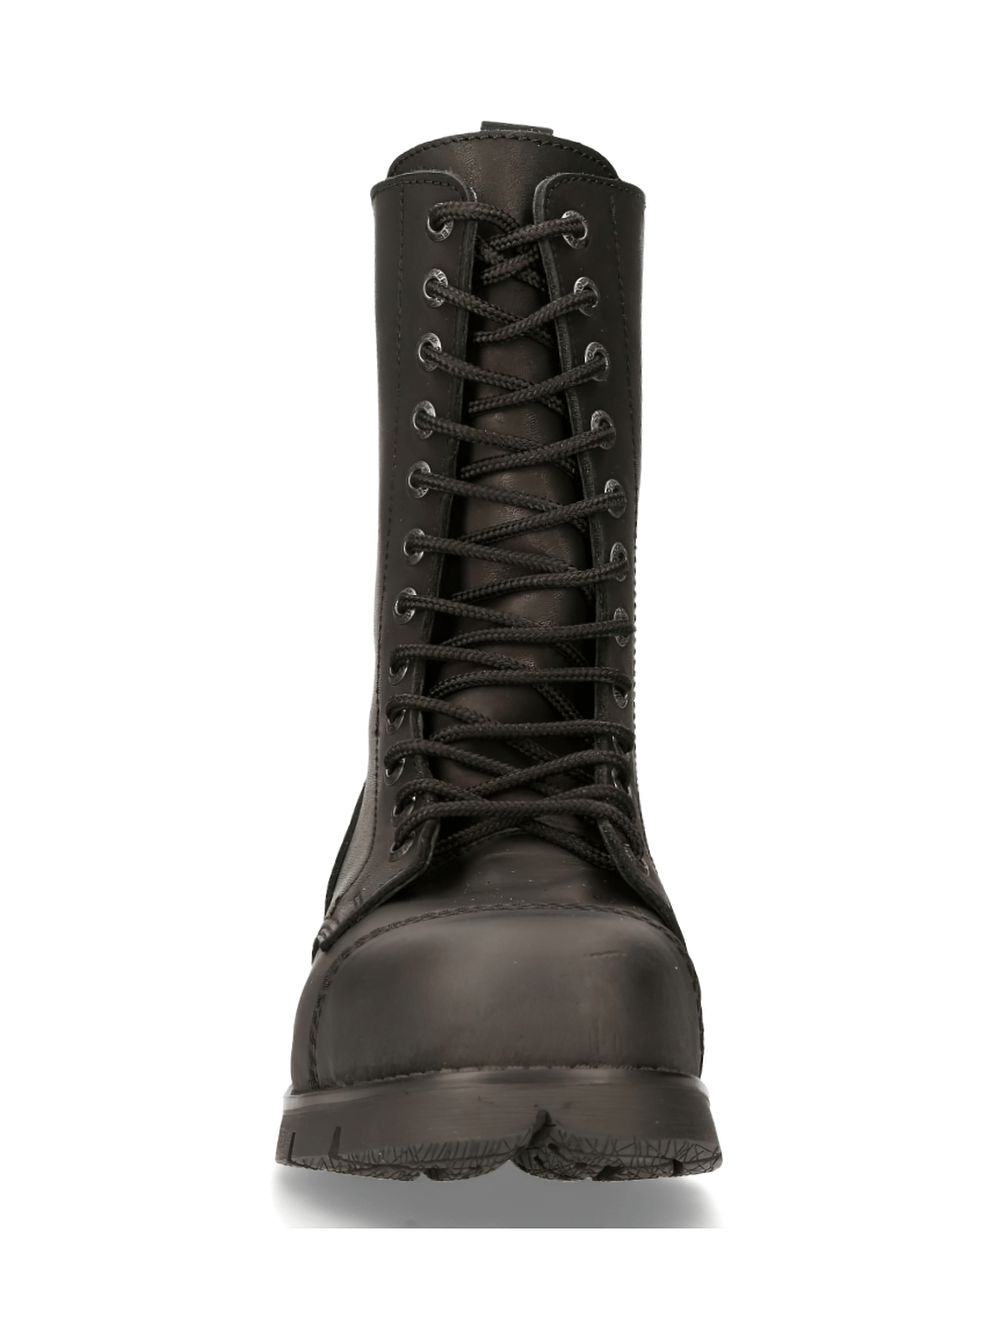 NEW ROCK Gothic Military Style Leather Ankle Boots